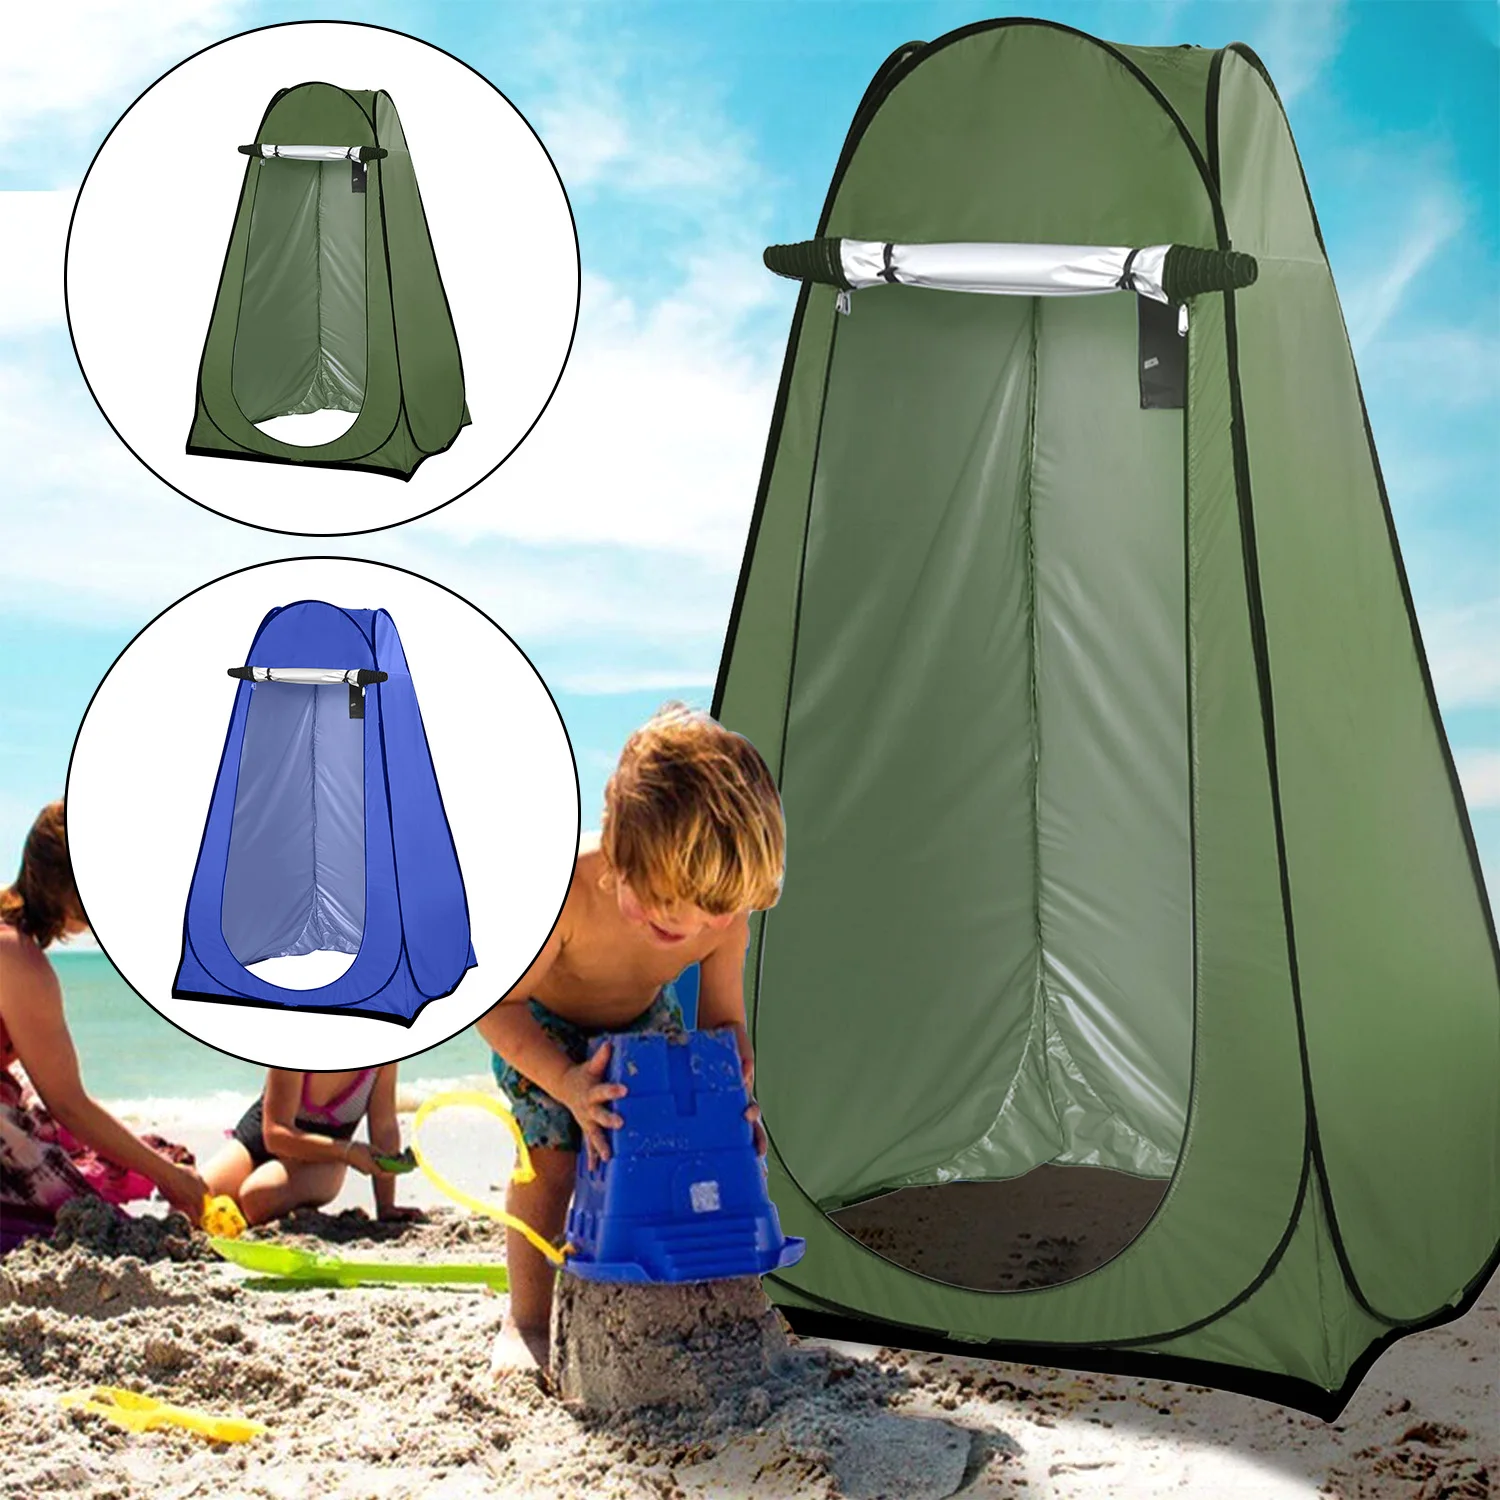 Portable Instant Pop Up Tent Camping Shower With Folding Toilet Portable Chair 